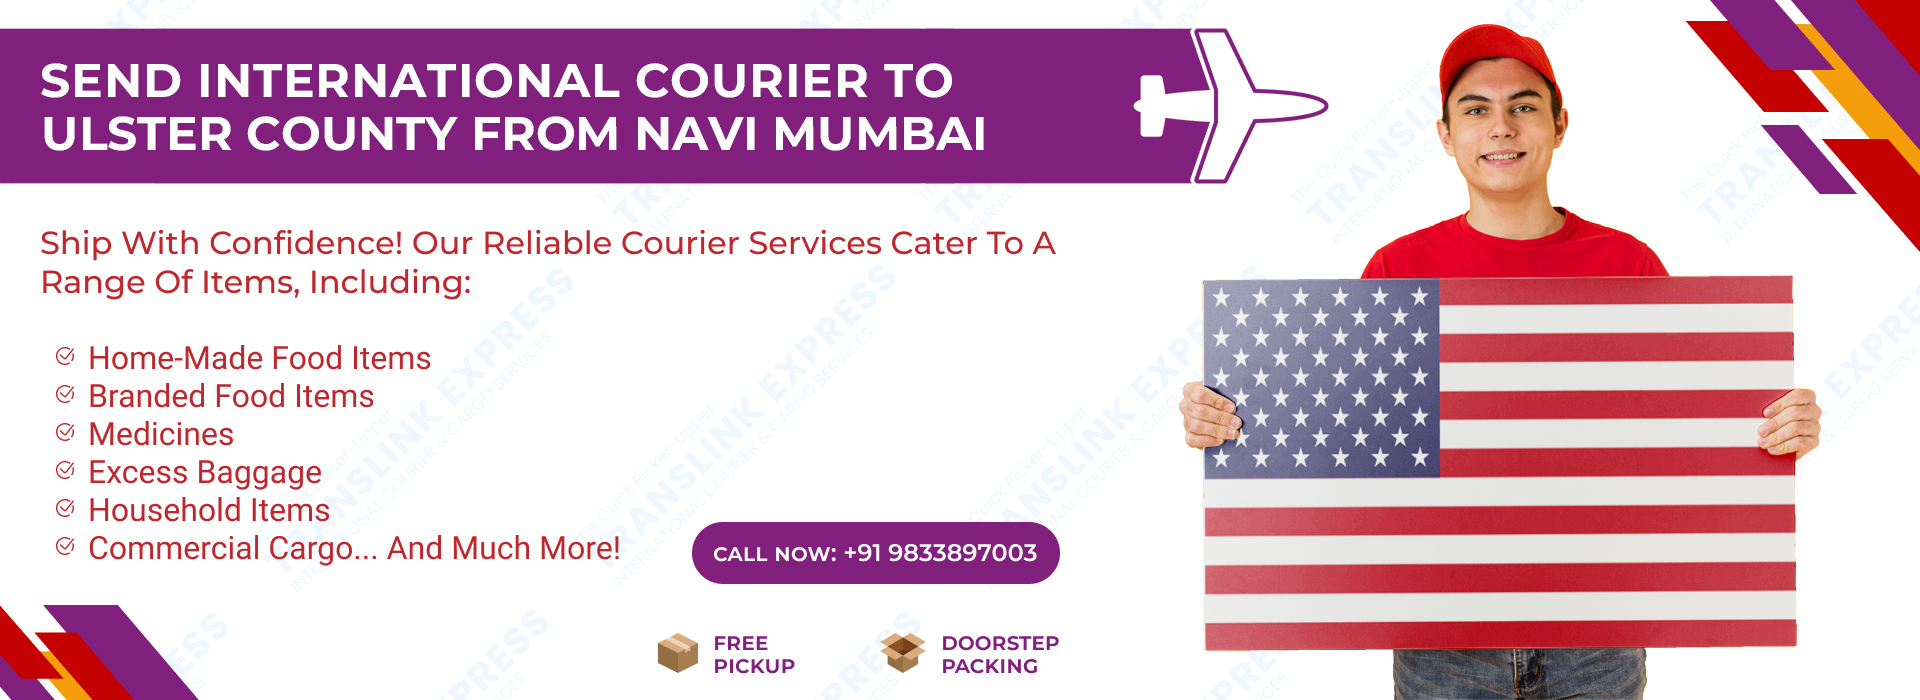 Courier to Ulster County From Navi Mumbai